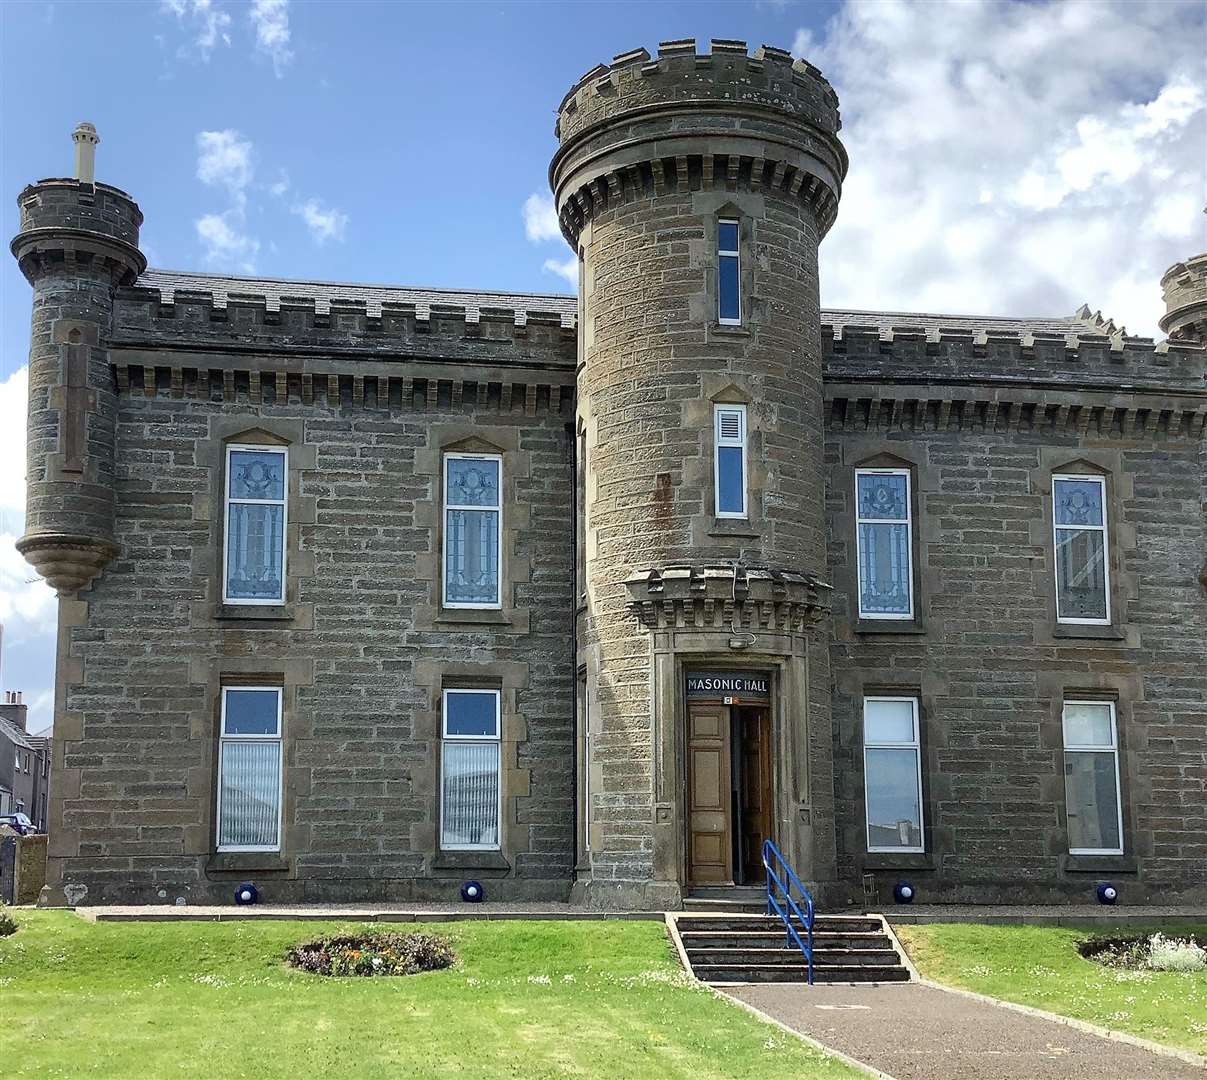 The Masonic Hall in Thurso will host the event.